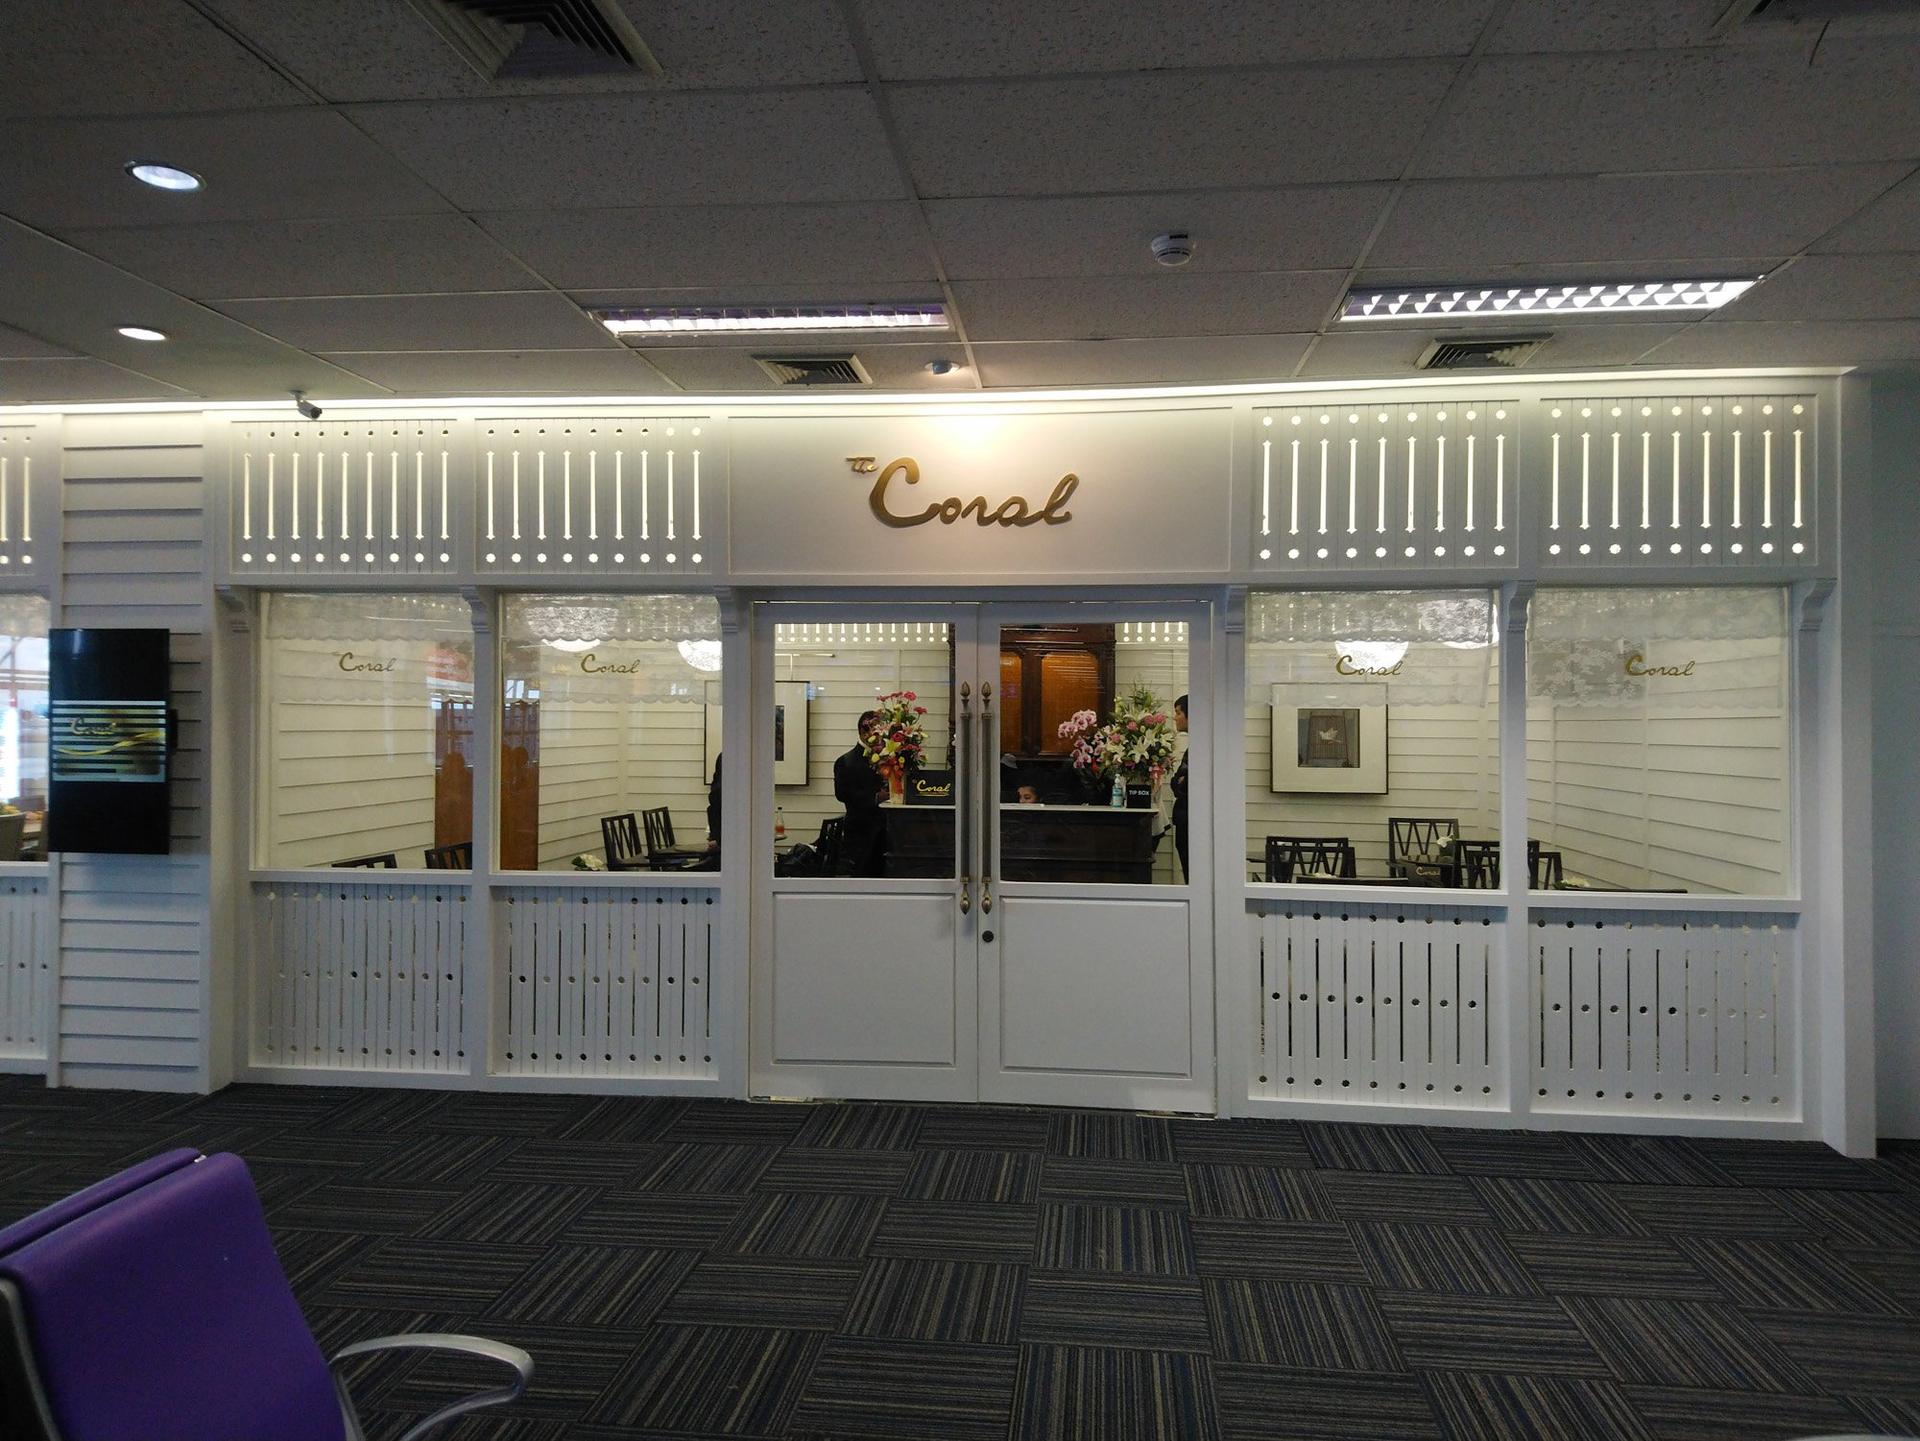 The Coral Executive Lounge image 22 of 30